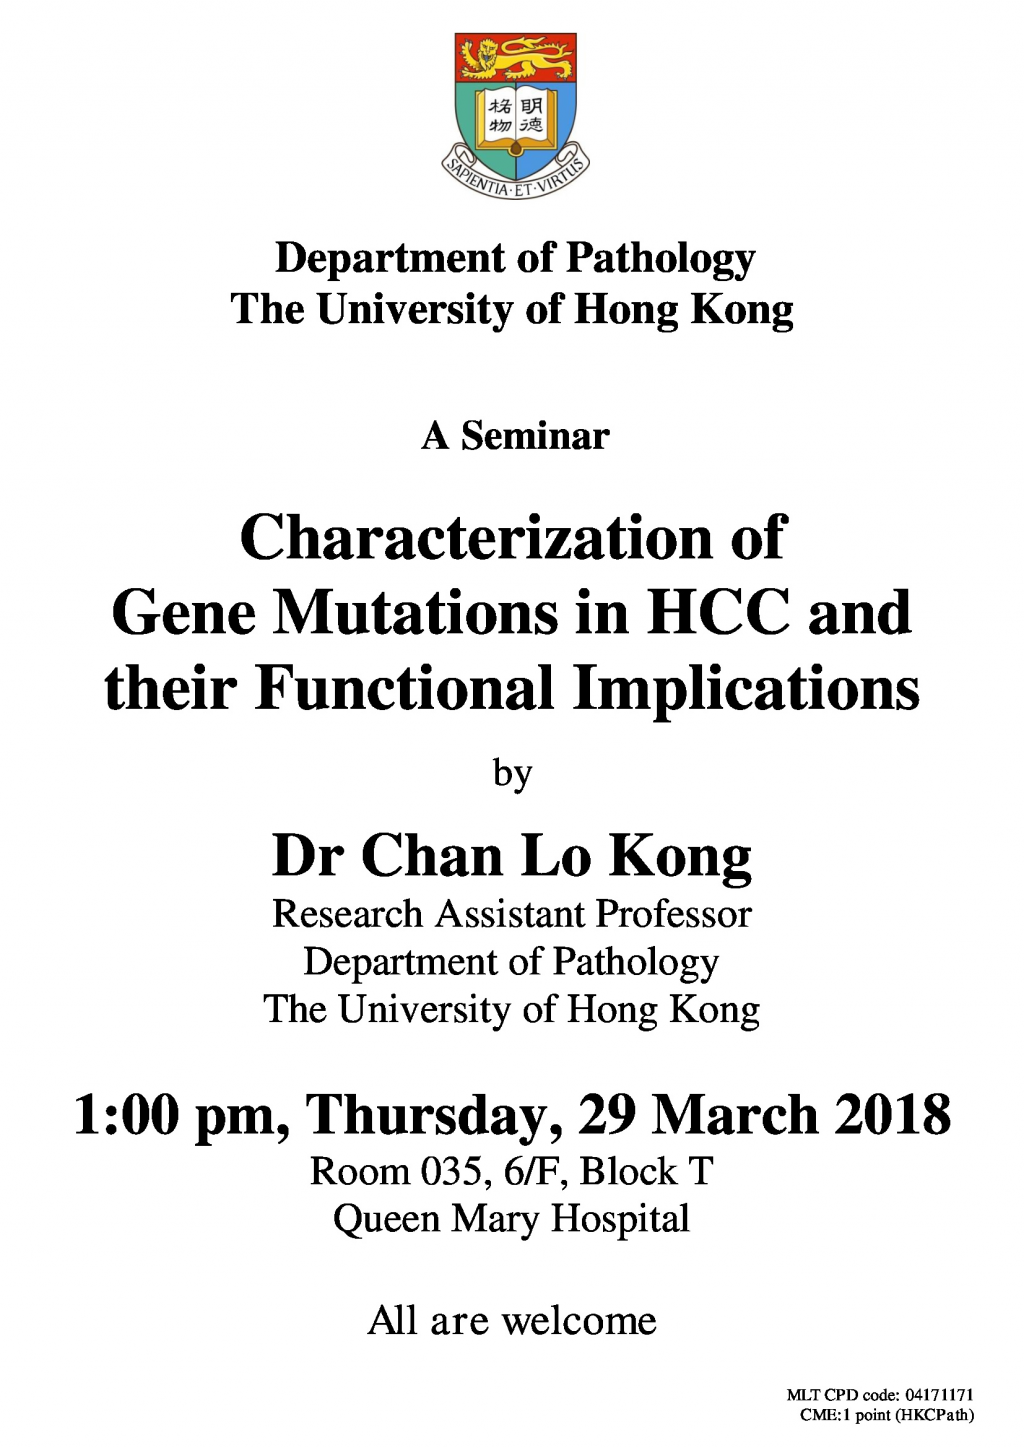 A Seminar on Characterization of Gene Mutations in HCC and their Functional Implications by Dr Chan Lo Kong on 29 March 2018